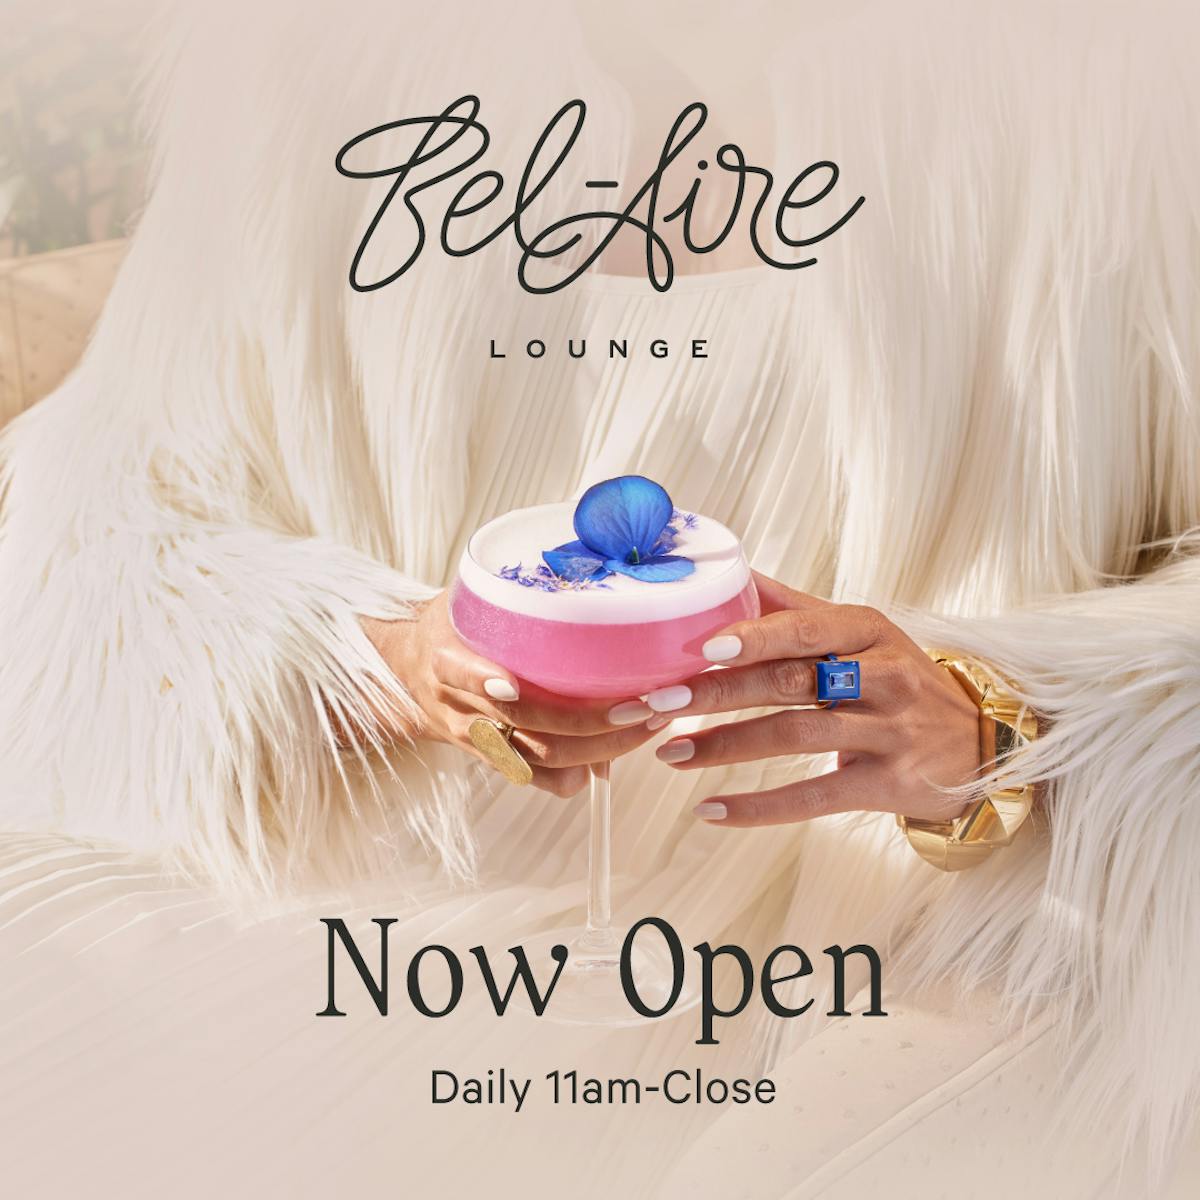 Now Open Graphic for one of the newest lounges in Las Vegas called Bel-Aire at Durango